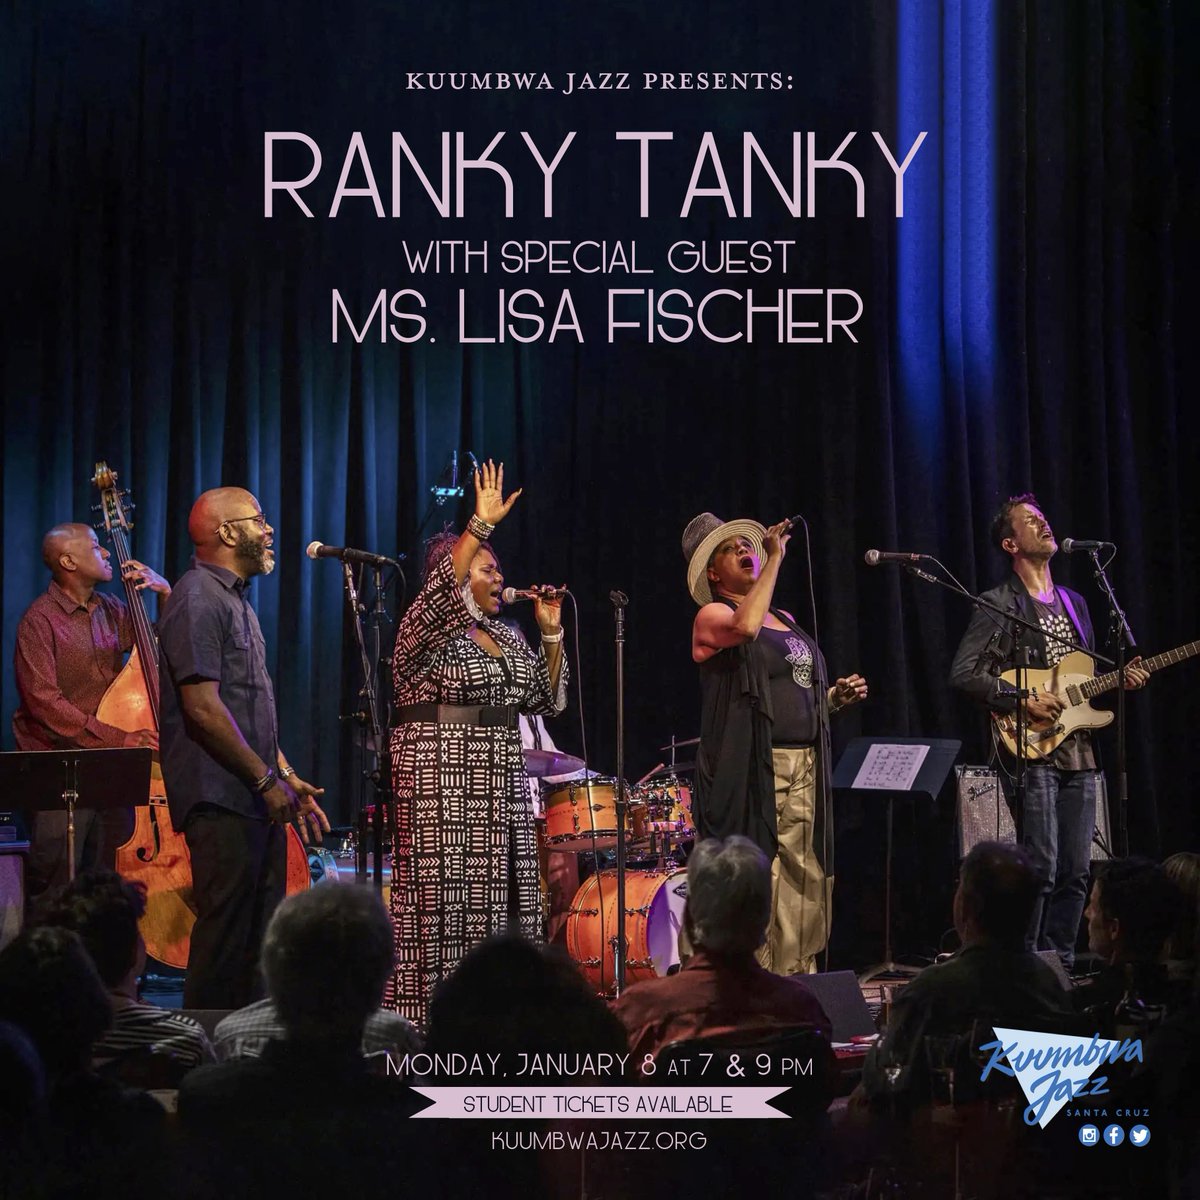 Join us for our first shows of 2024: @Ranky_Tanky with special guest @lisafischersing on Jan. 8th. The 7 PM show is already sold out and 9 PM tickets are going fast, so get yours today! 7 PM 🎟️🎟️: SOLD OUT 9 PM 🎟️🎟️: bit.ly/3rZbyKR #rankytanky #lisafischer #kuumbwajazz